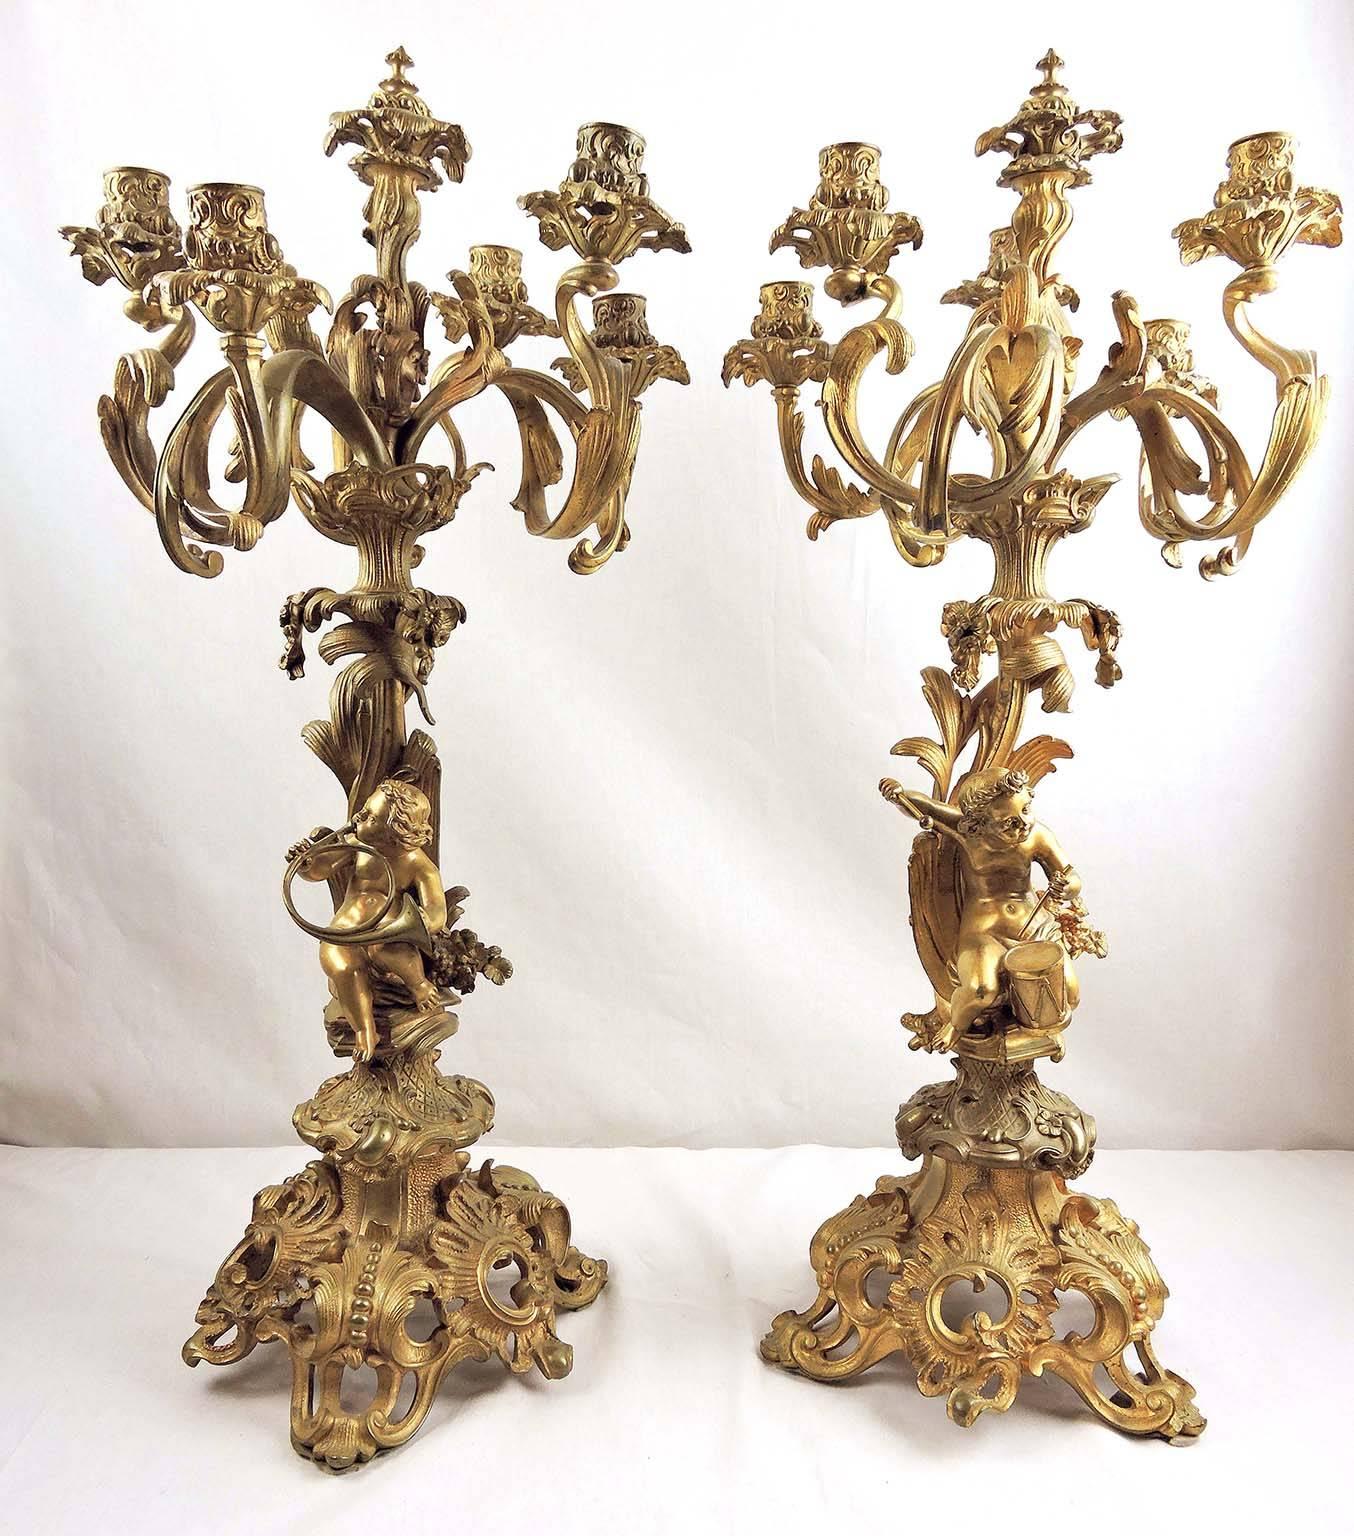 Pair of Large 19th Century Gilt Bronze-Mounted Six-Arm Figural Rococo Candelabra For Sale 1